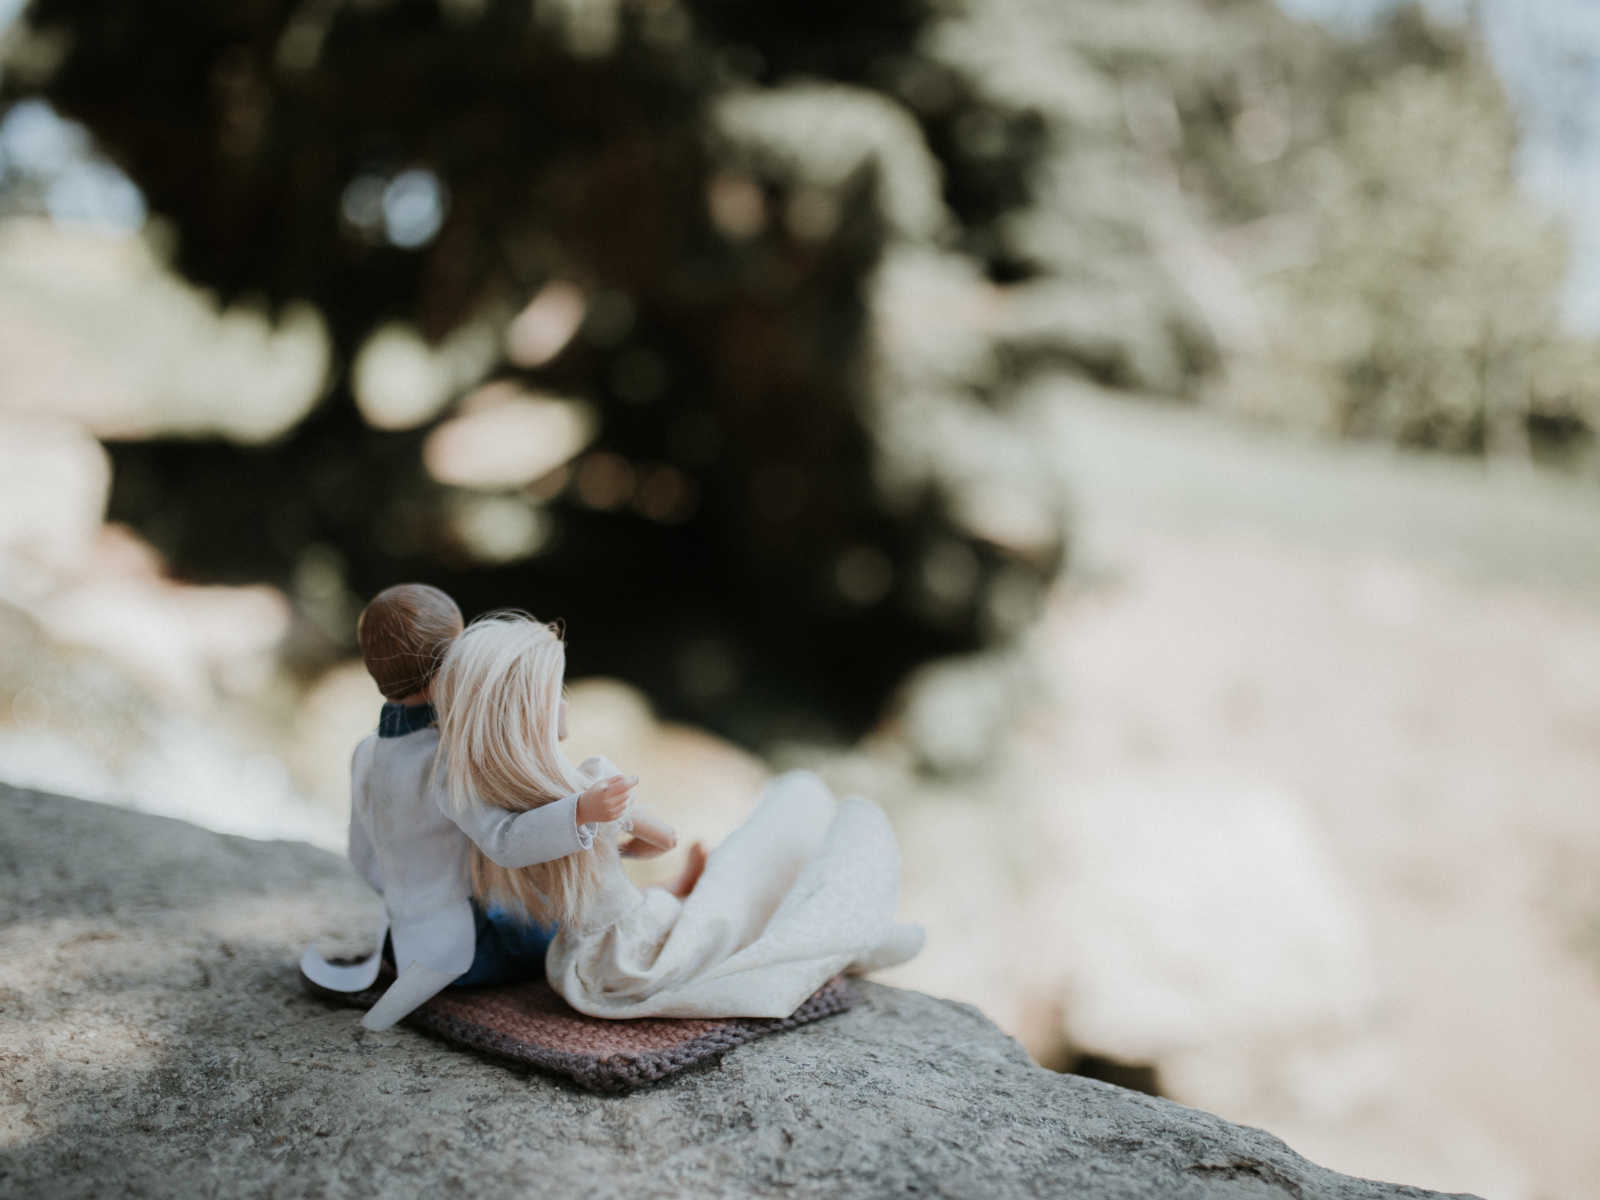 ken sits next to barbie on a rock with his arm wrapped around her while they look out into the distance